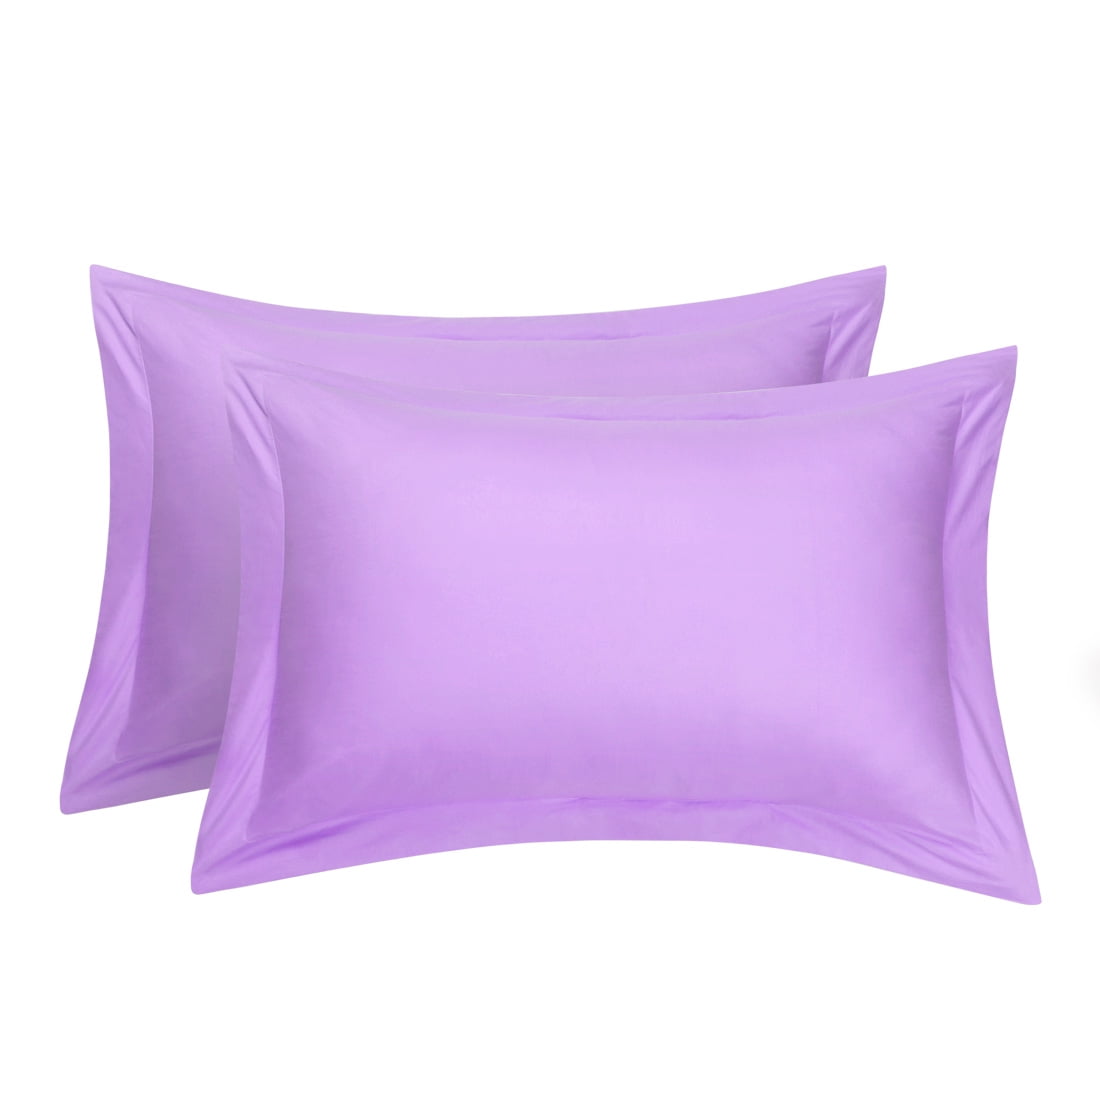 PILLOWCASE Constellations in Pastel Cotton wLilac Cotton:Pink Cotton